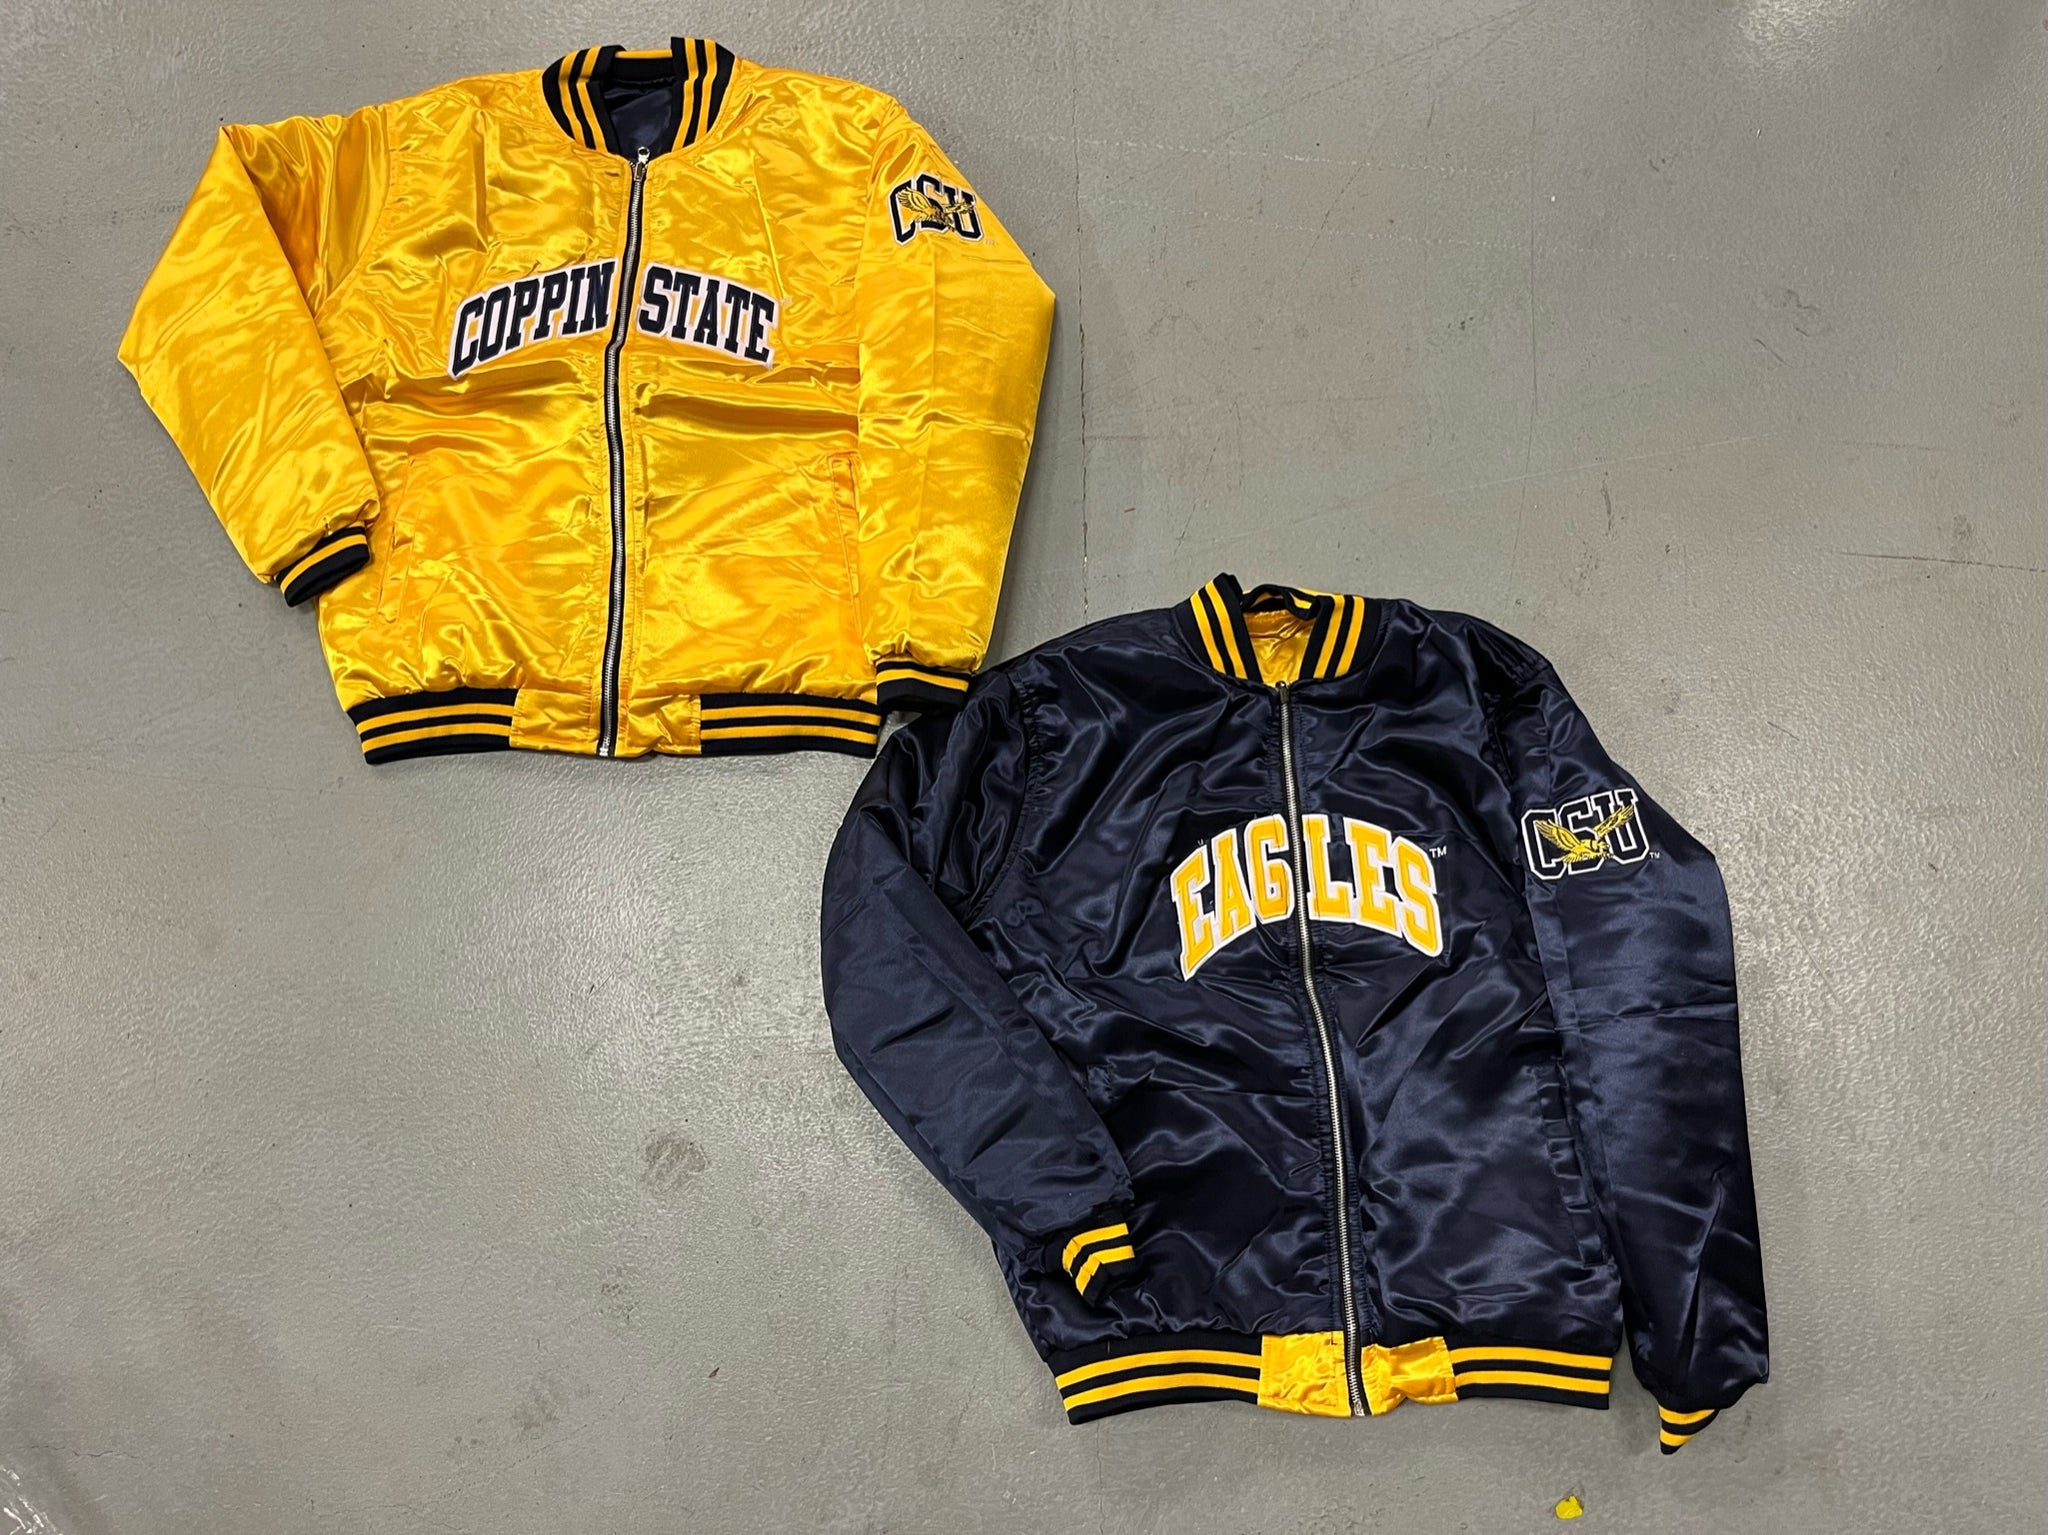 COPPIN STATE REVERSIBLE JACKET